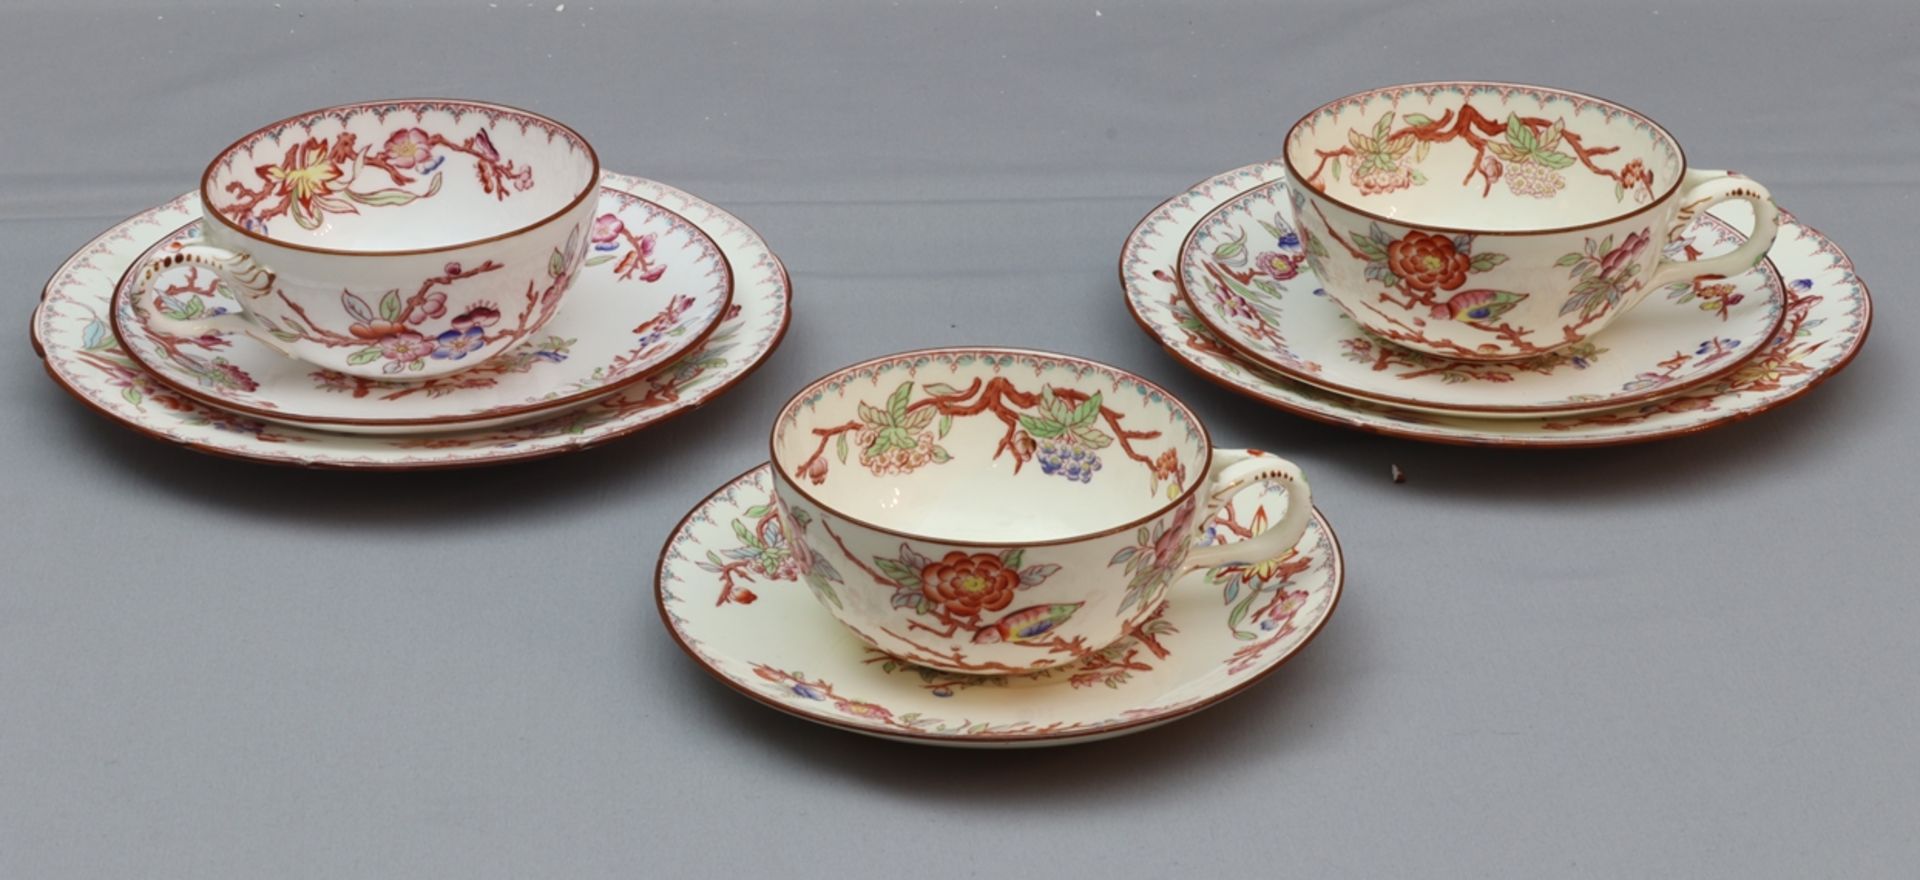 Three charming coffee sets, probably from France at the end of the 19th century. 